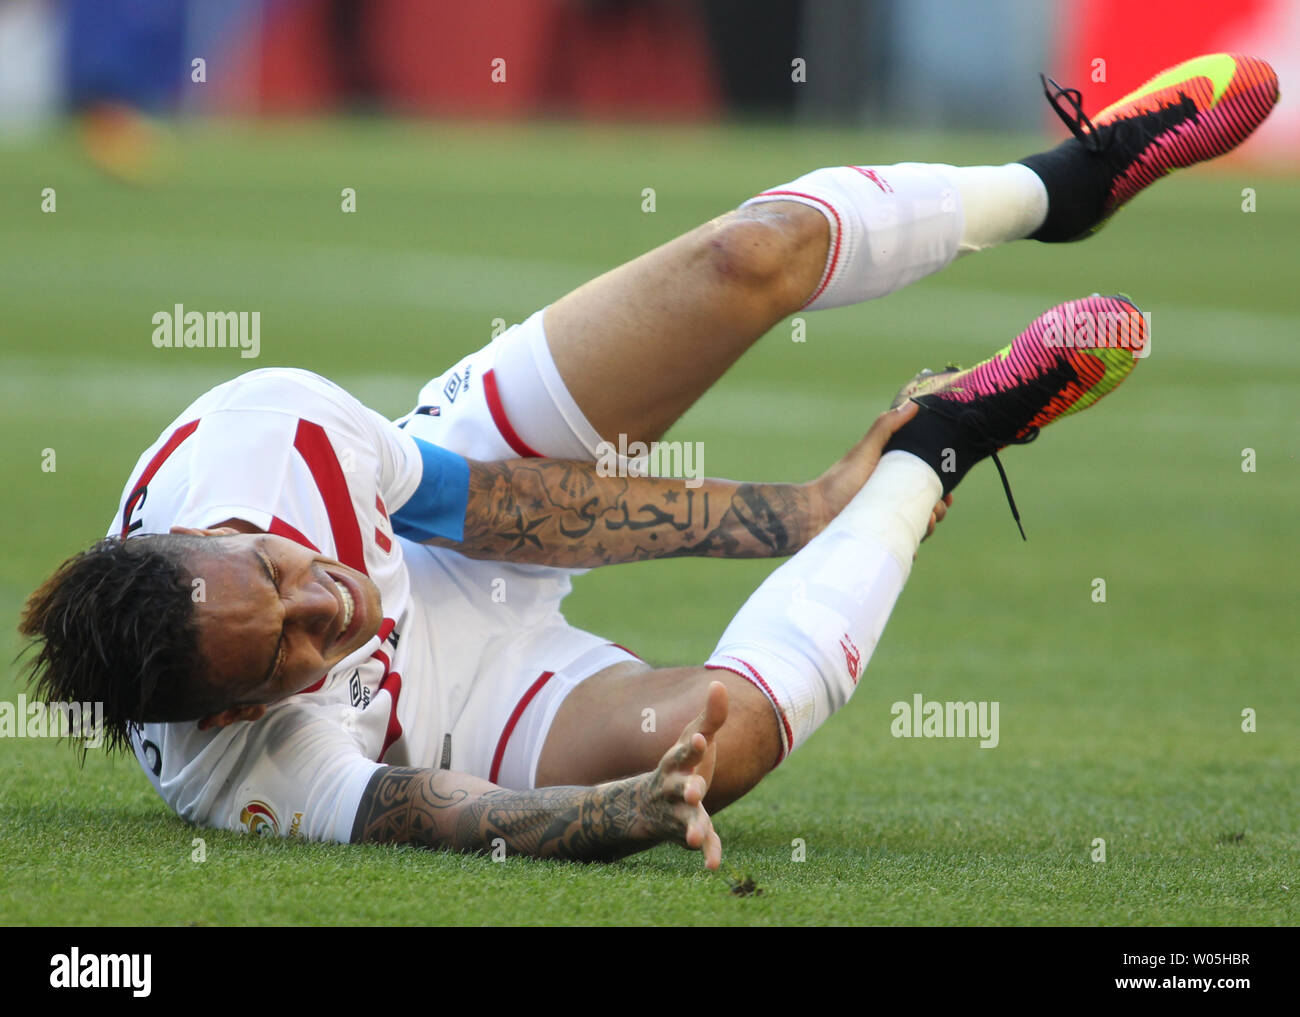 Peru's Paolo Guerrero holds in ankle after being kicked by a Haiti defender in a 2016 Copa America Centenario soccer match at CenturyLink Field in Seattle, Washington on June 4, 2016.  Peru's Guerrero scored the only goal in the 1-0 win over Hait1- 1-0. Photo by Jim Bryant/ UPI Stock Photo